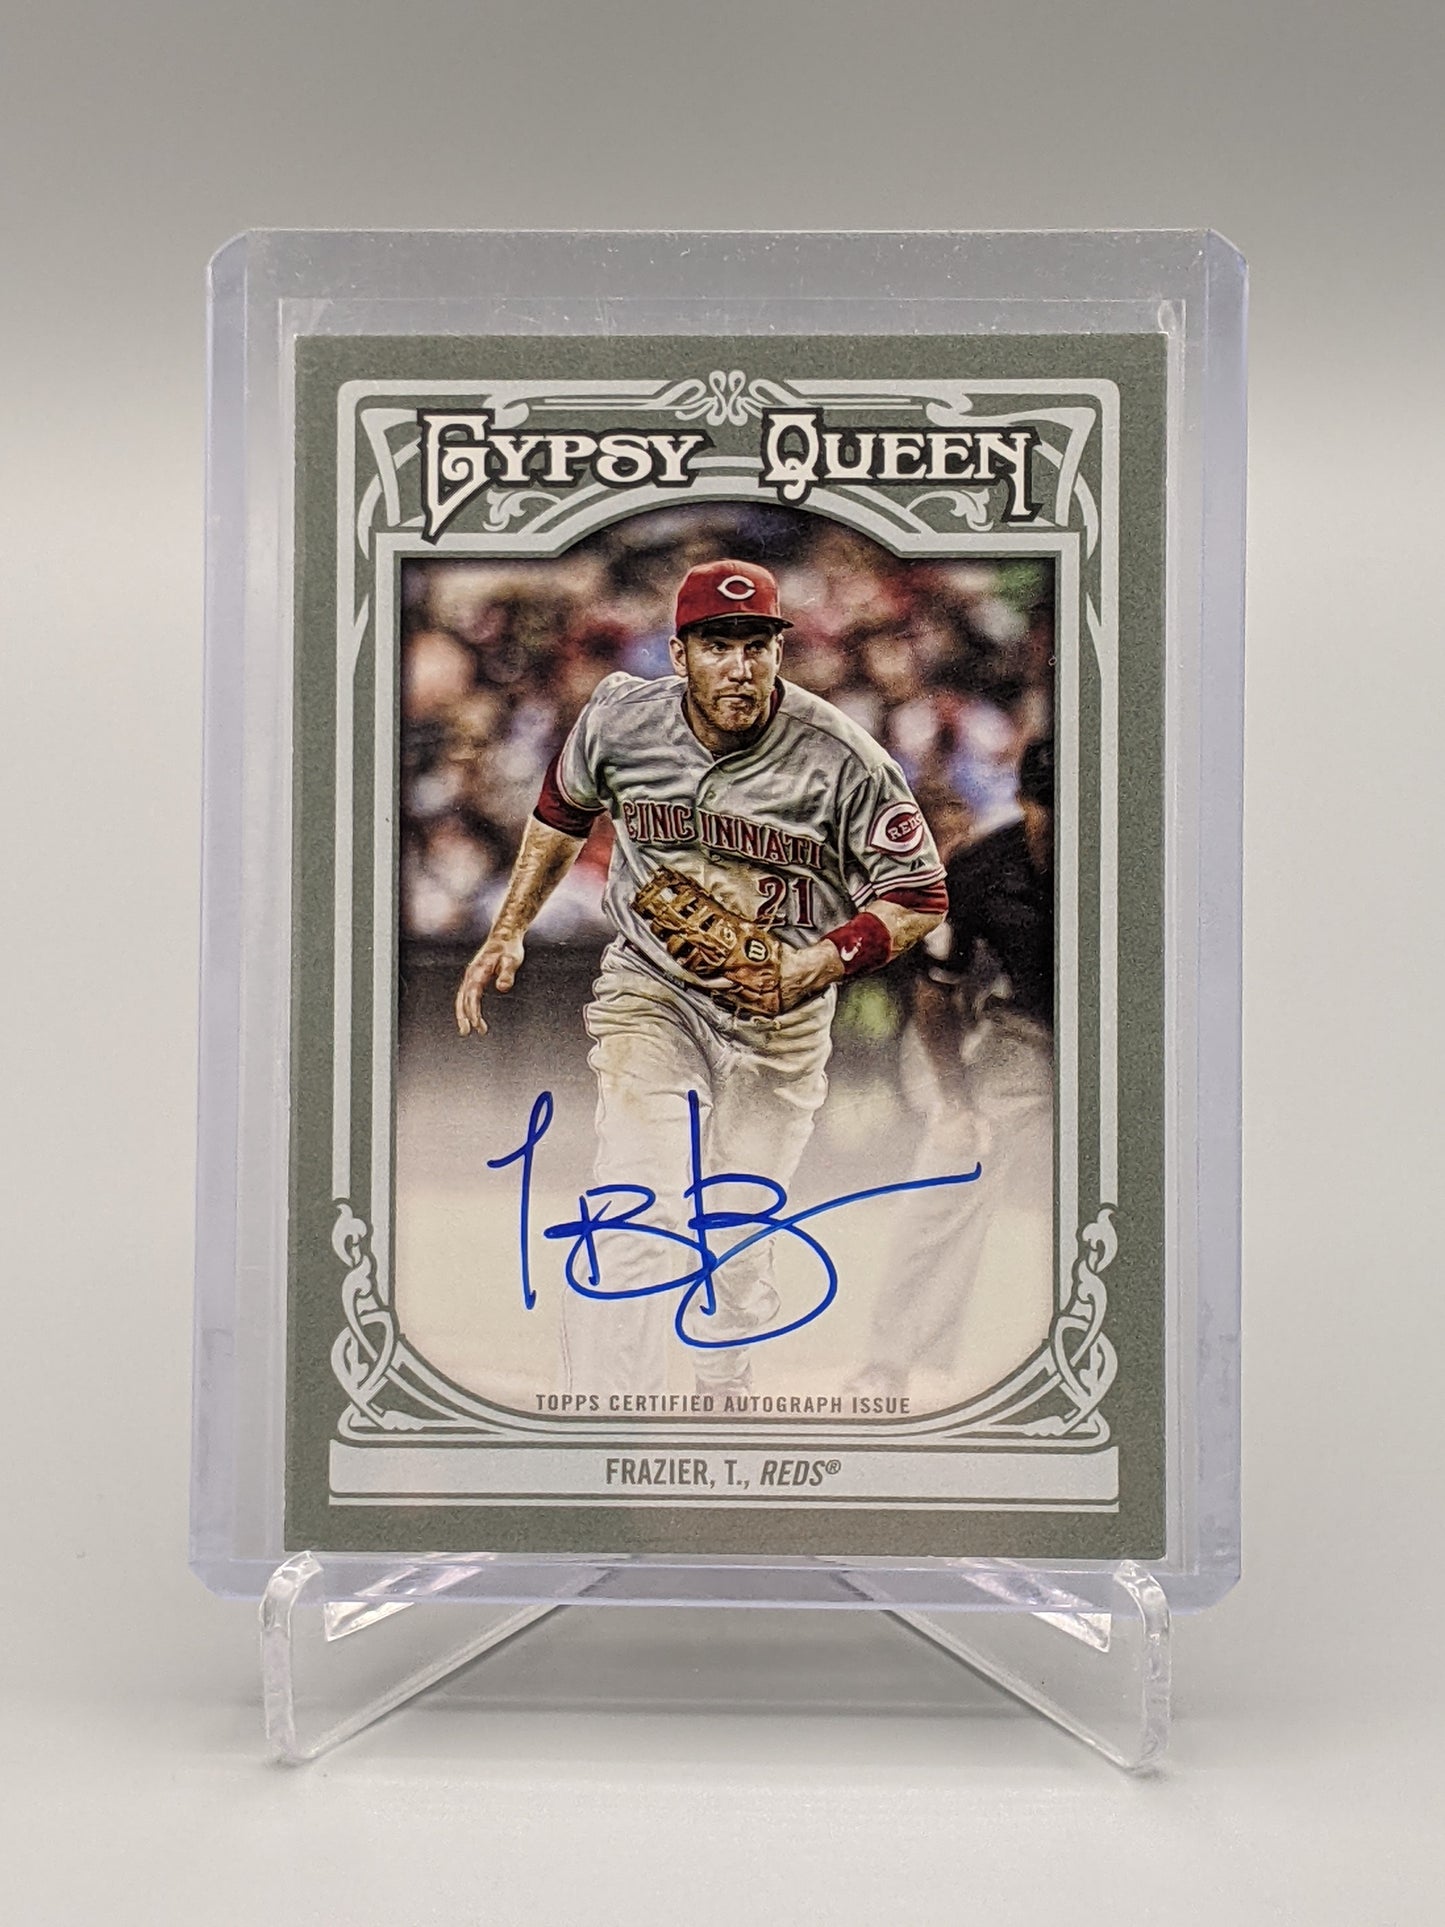 2013 Topps Gypsy Queen Todd Frazier Auto Reds